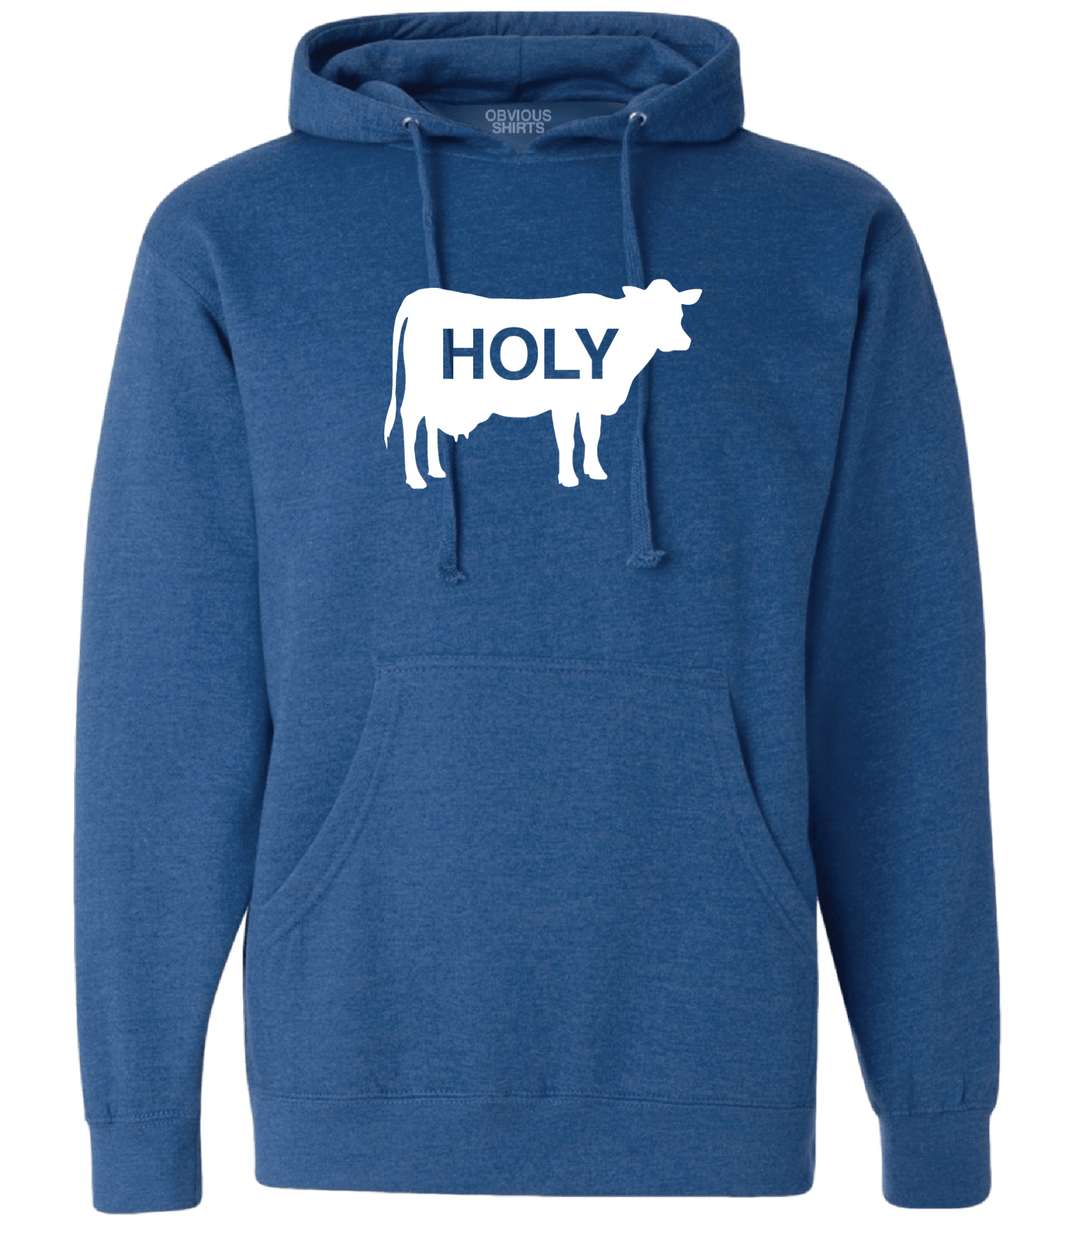 HOLY COW. (HOODED SWEATSHIRT) - OBVIOUS SHIRTS